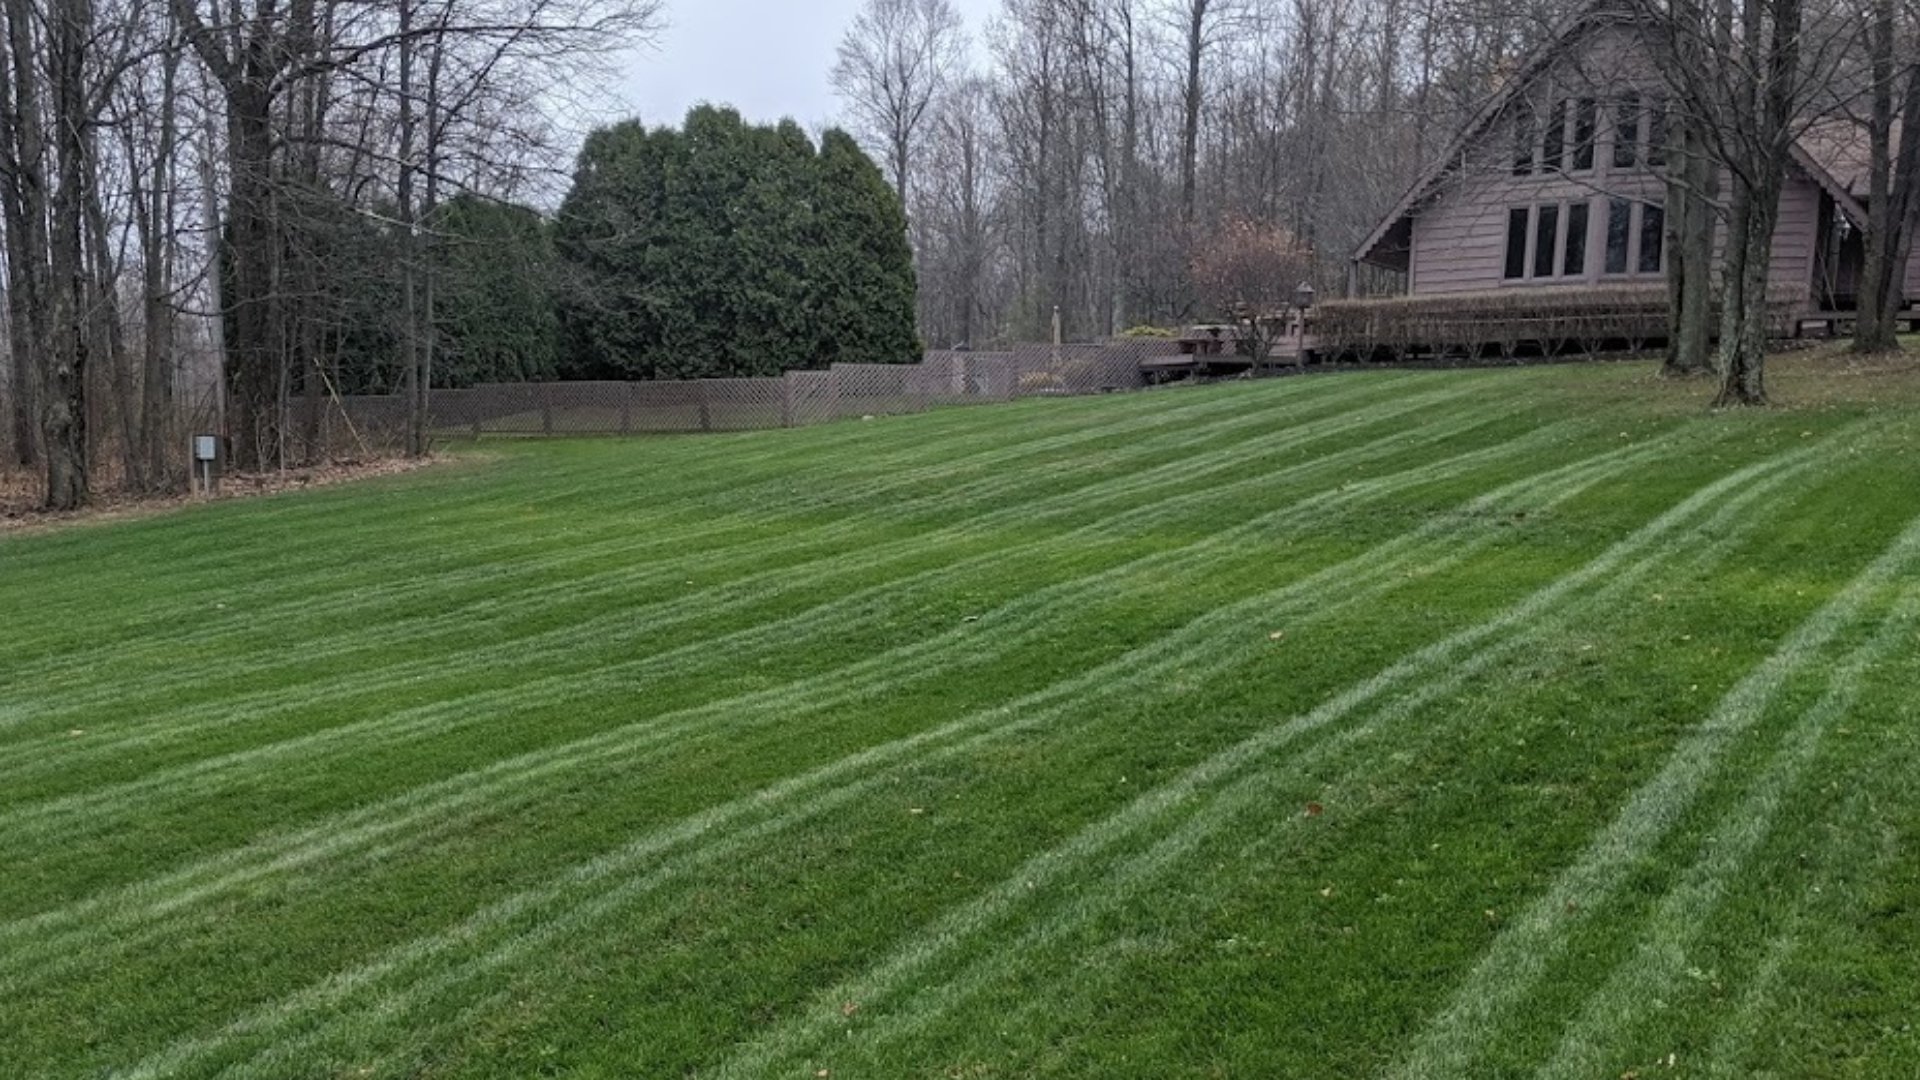 Summer Is Here! What Should You Be Doing for Your Lawn?